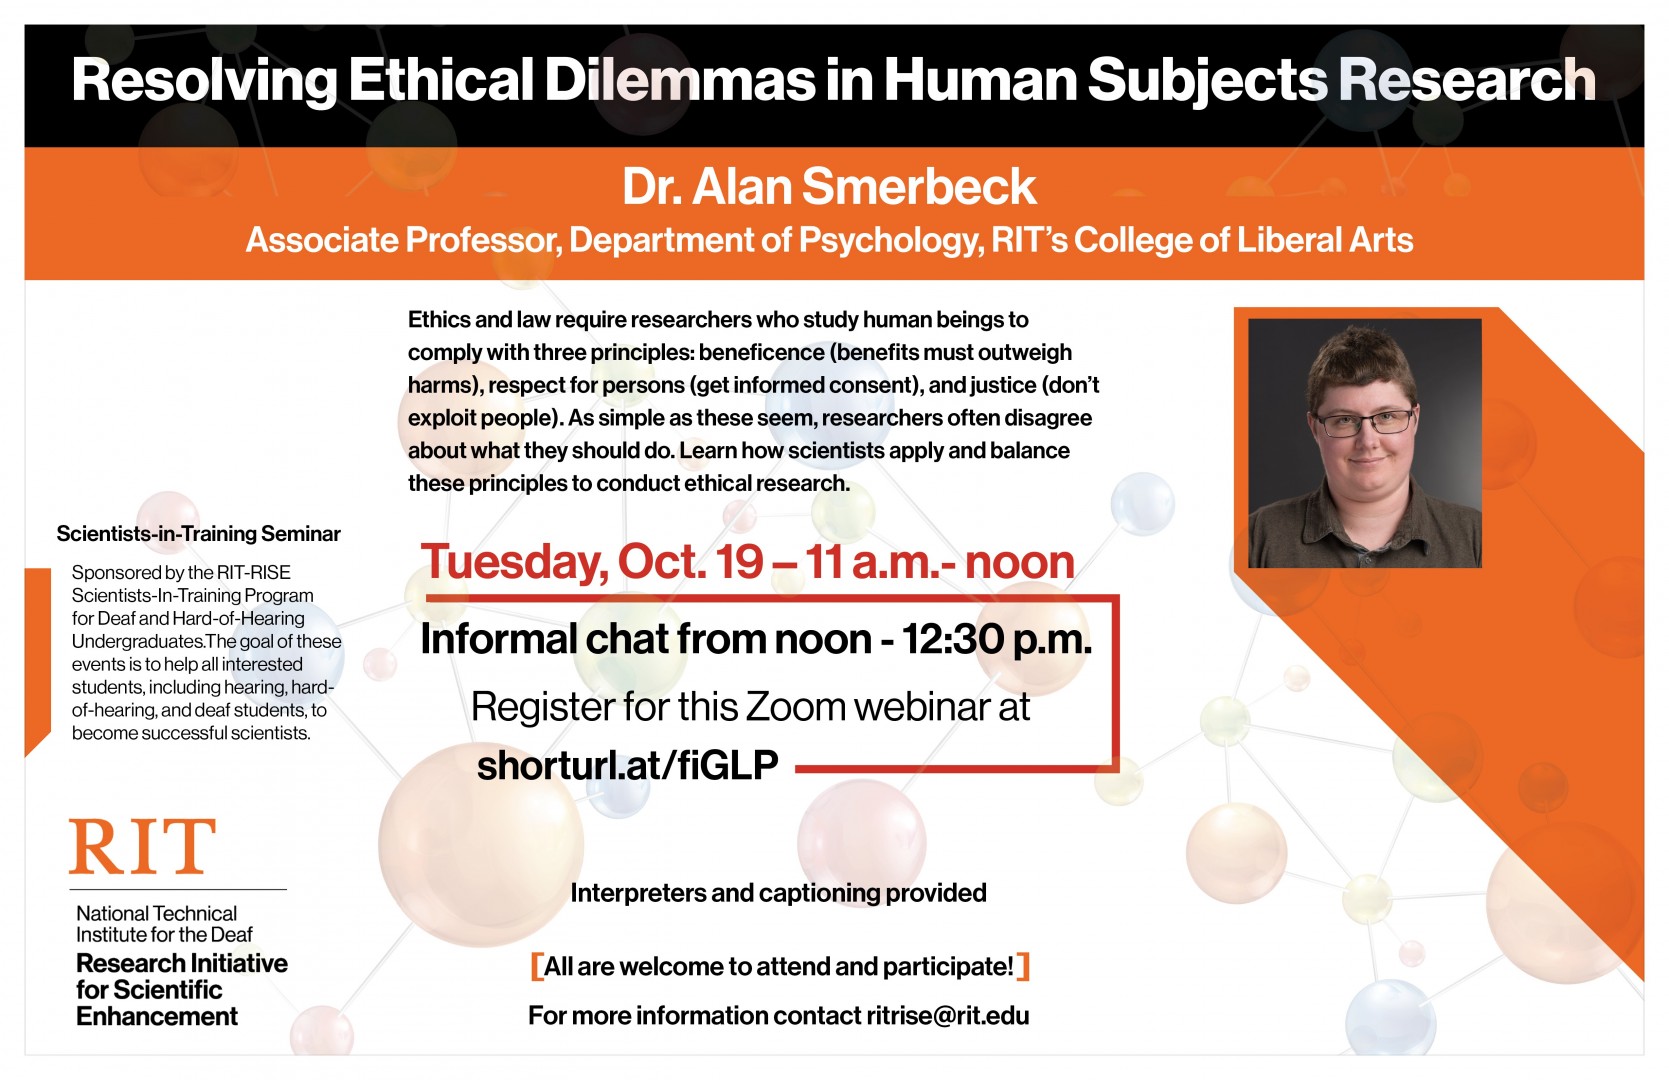 Image of Dr. Smerbeck with information on lecture and registration link.